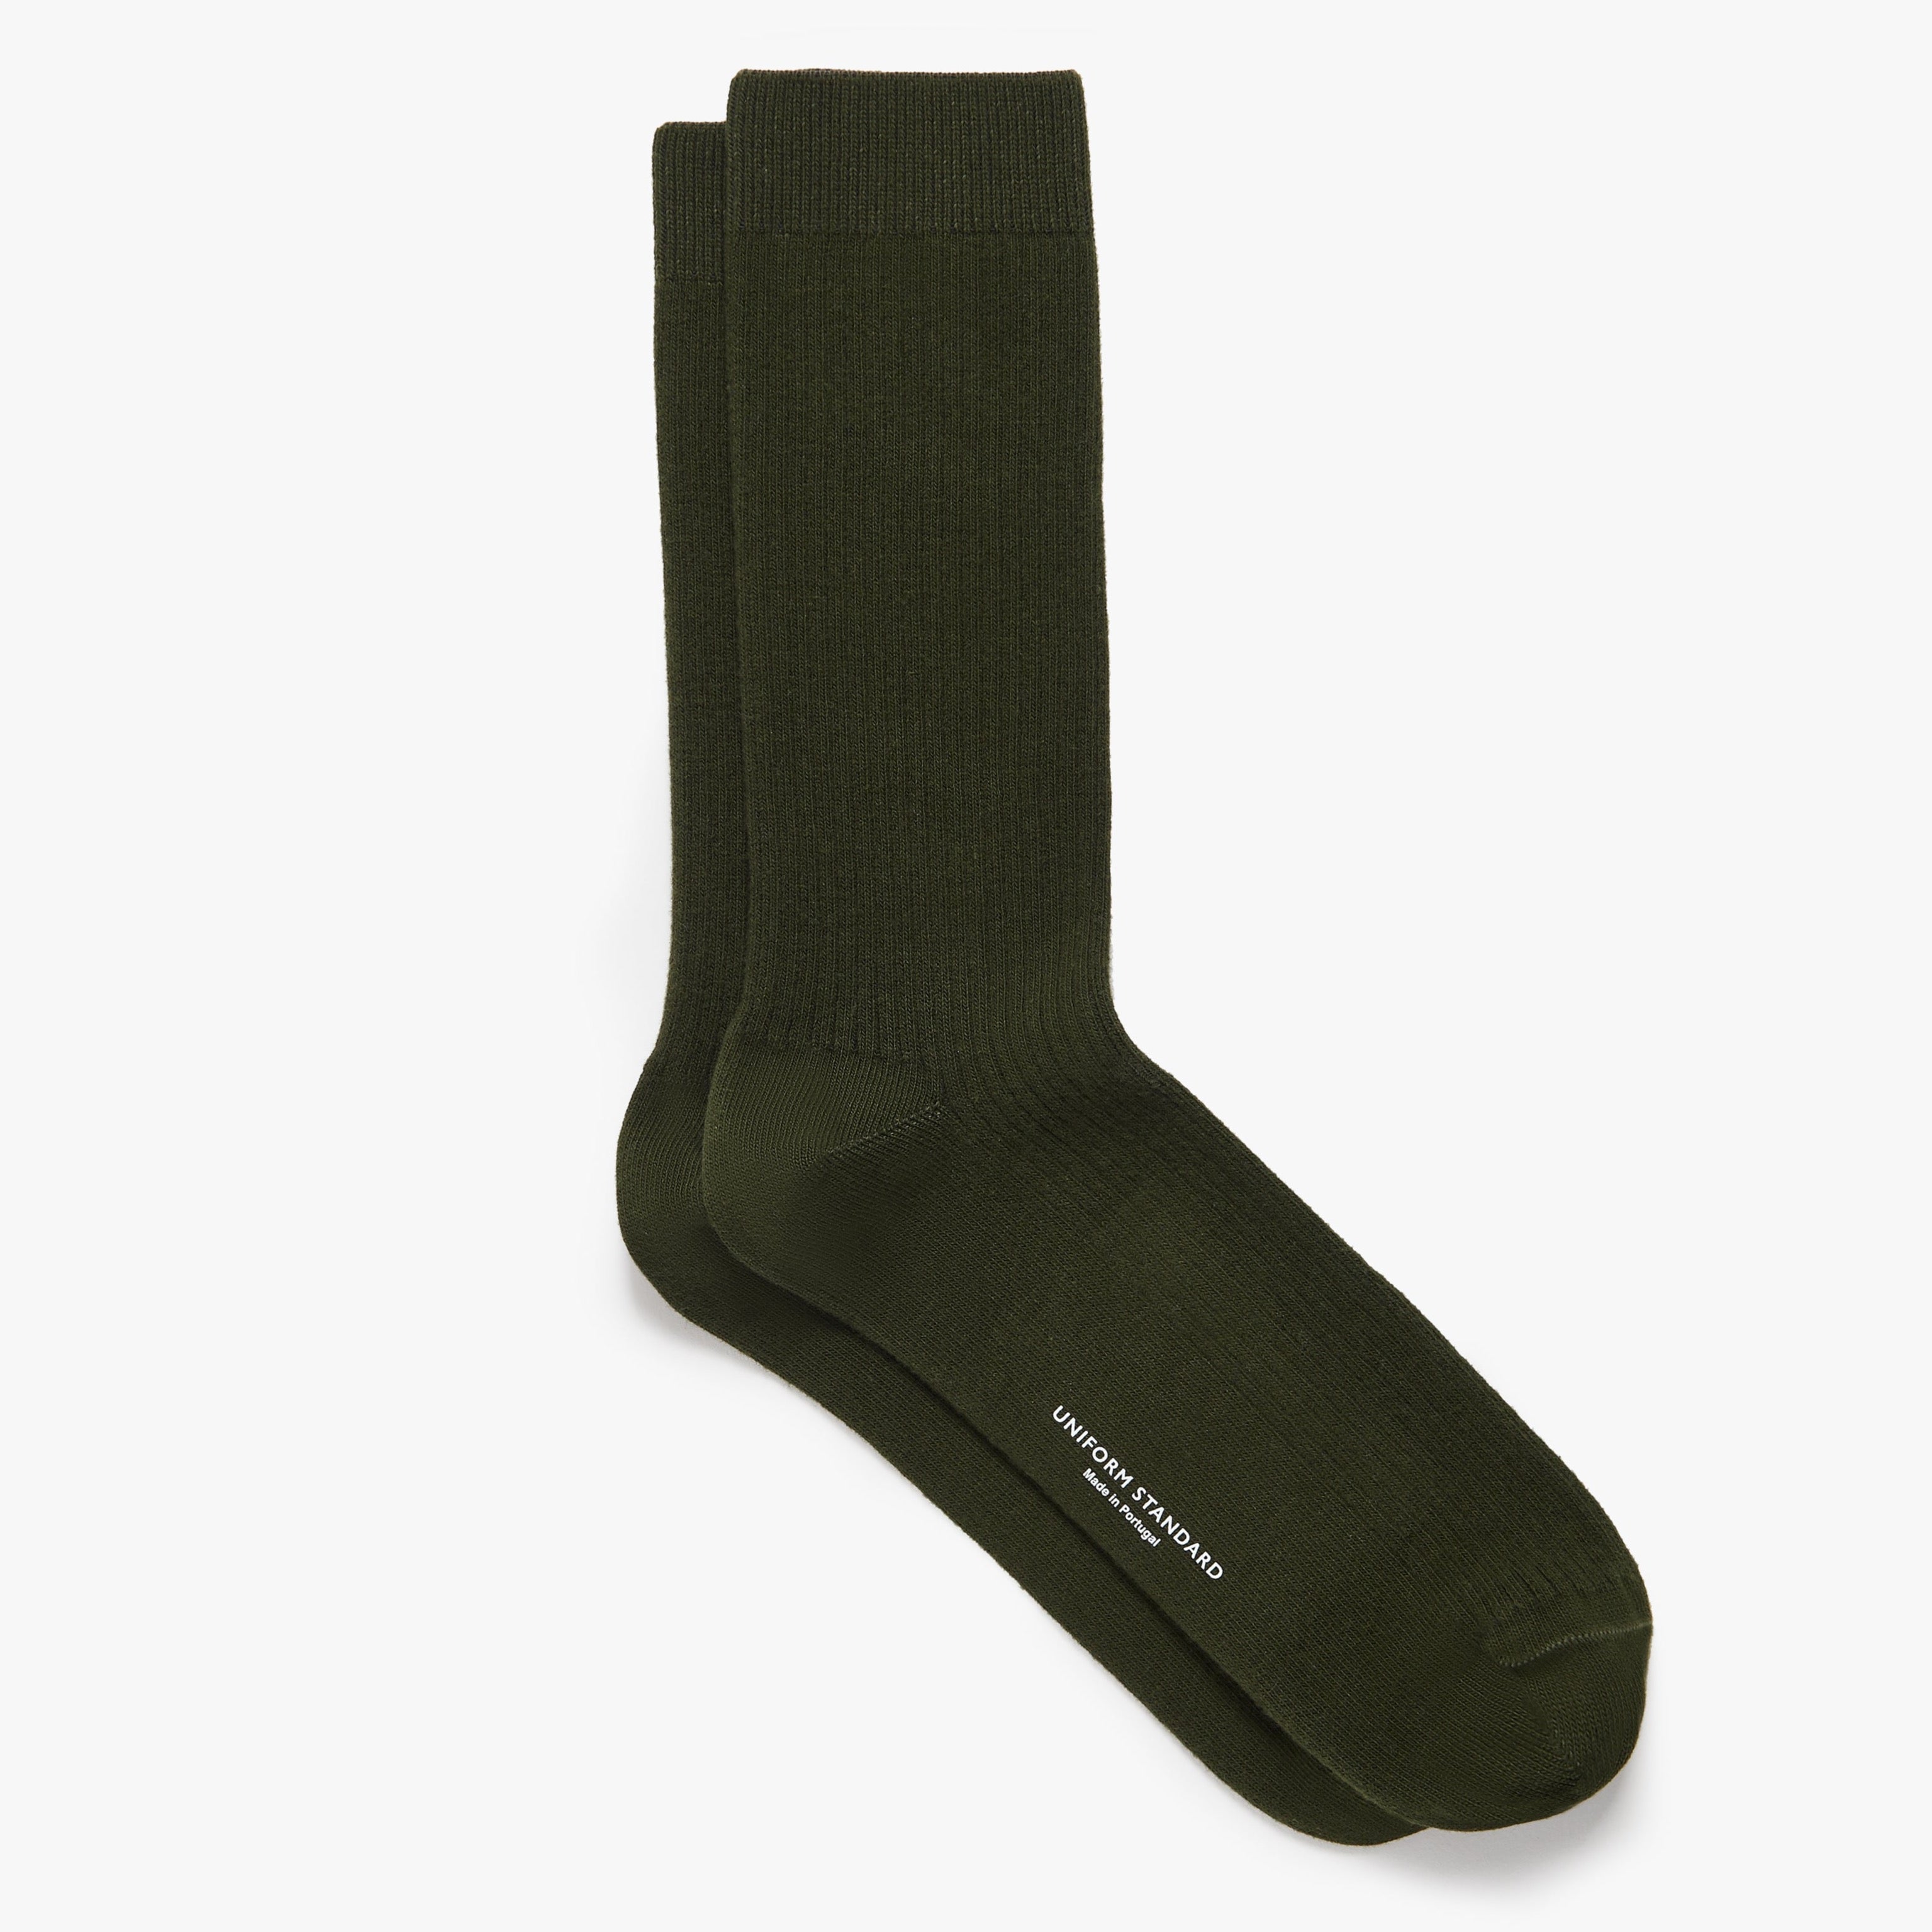 CozyChic® Men's Ribbed Socks in Heathered Olive / Carbon